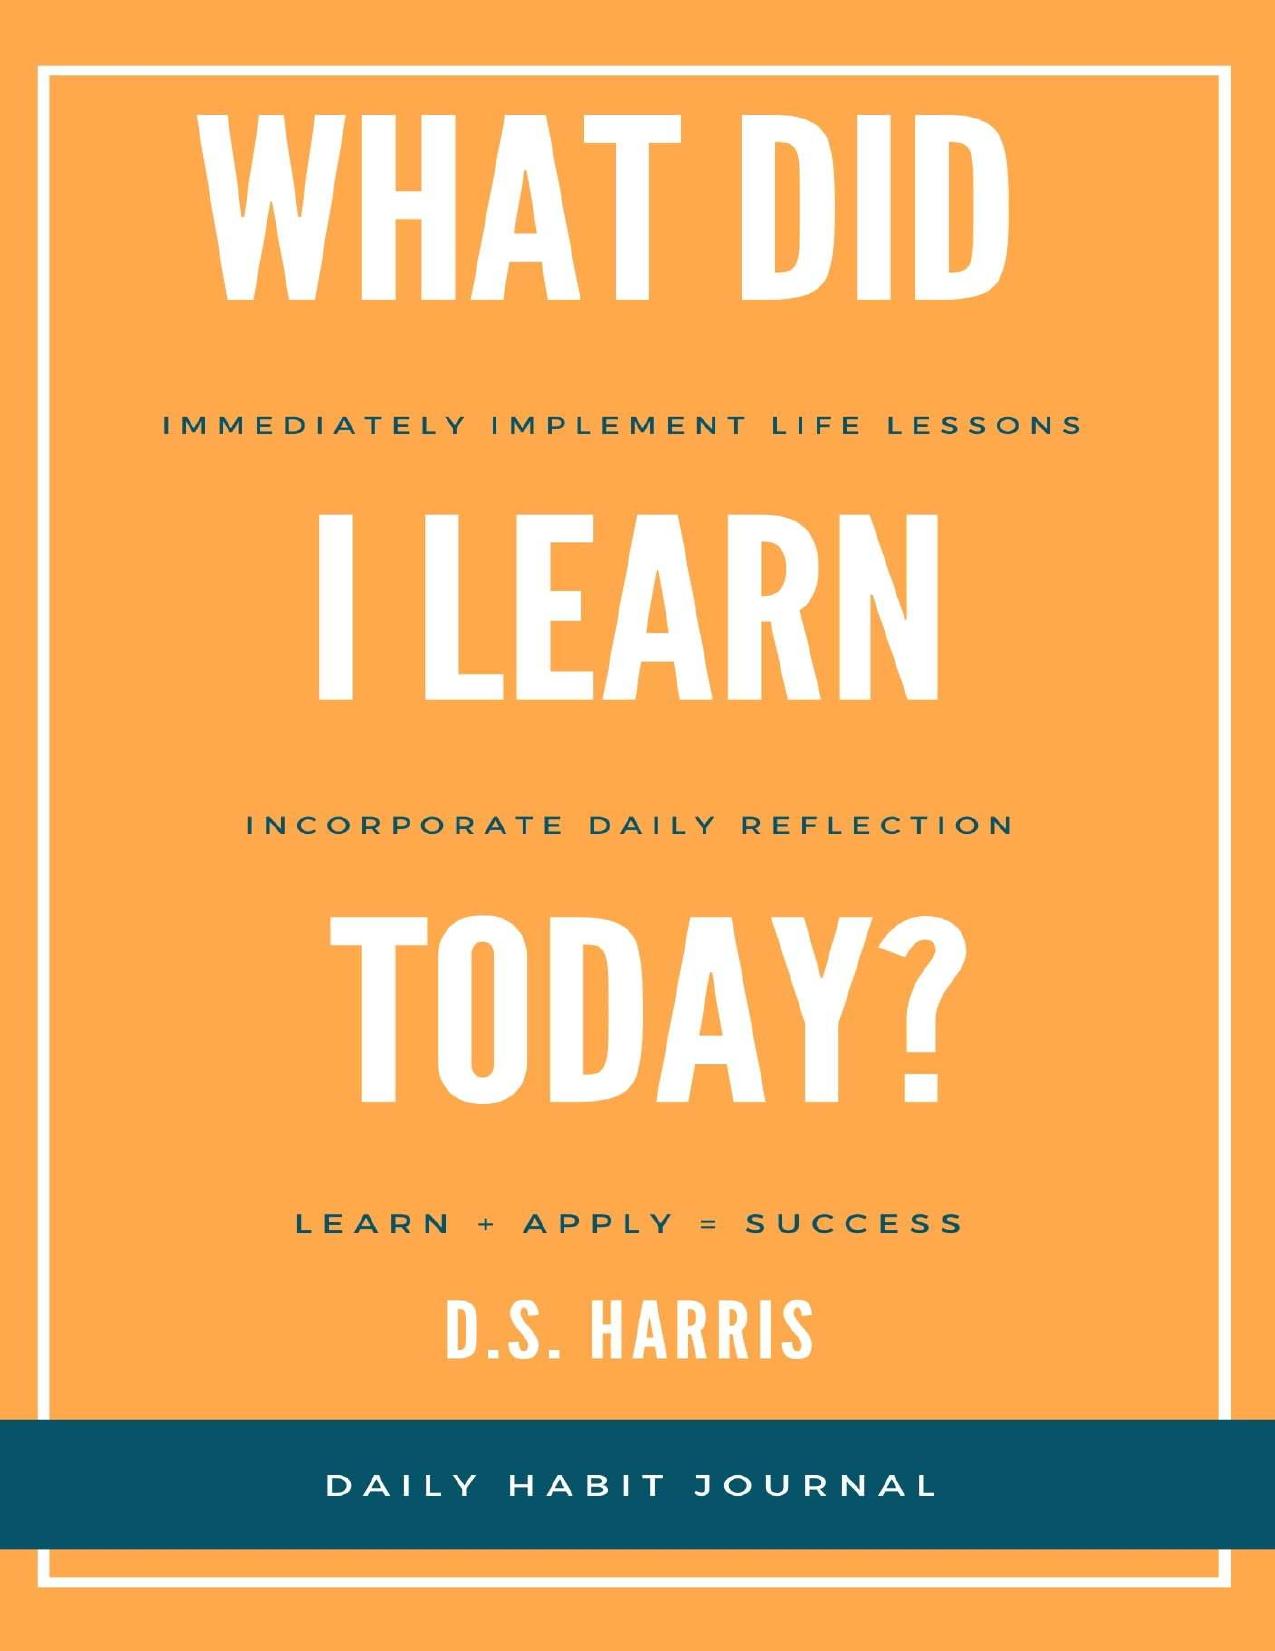 What Did I Learn Today?: Daily Habit Journal by Destiny S. Harris